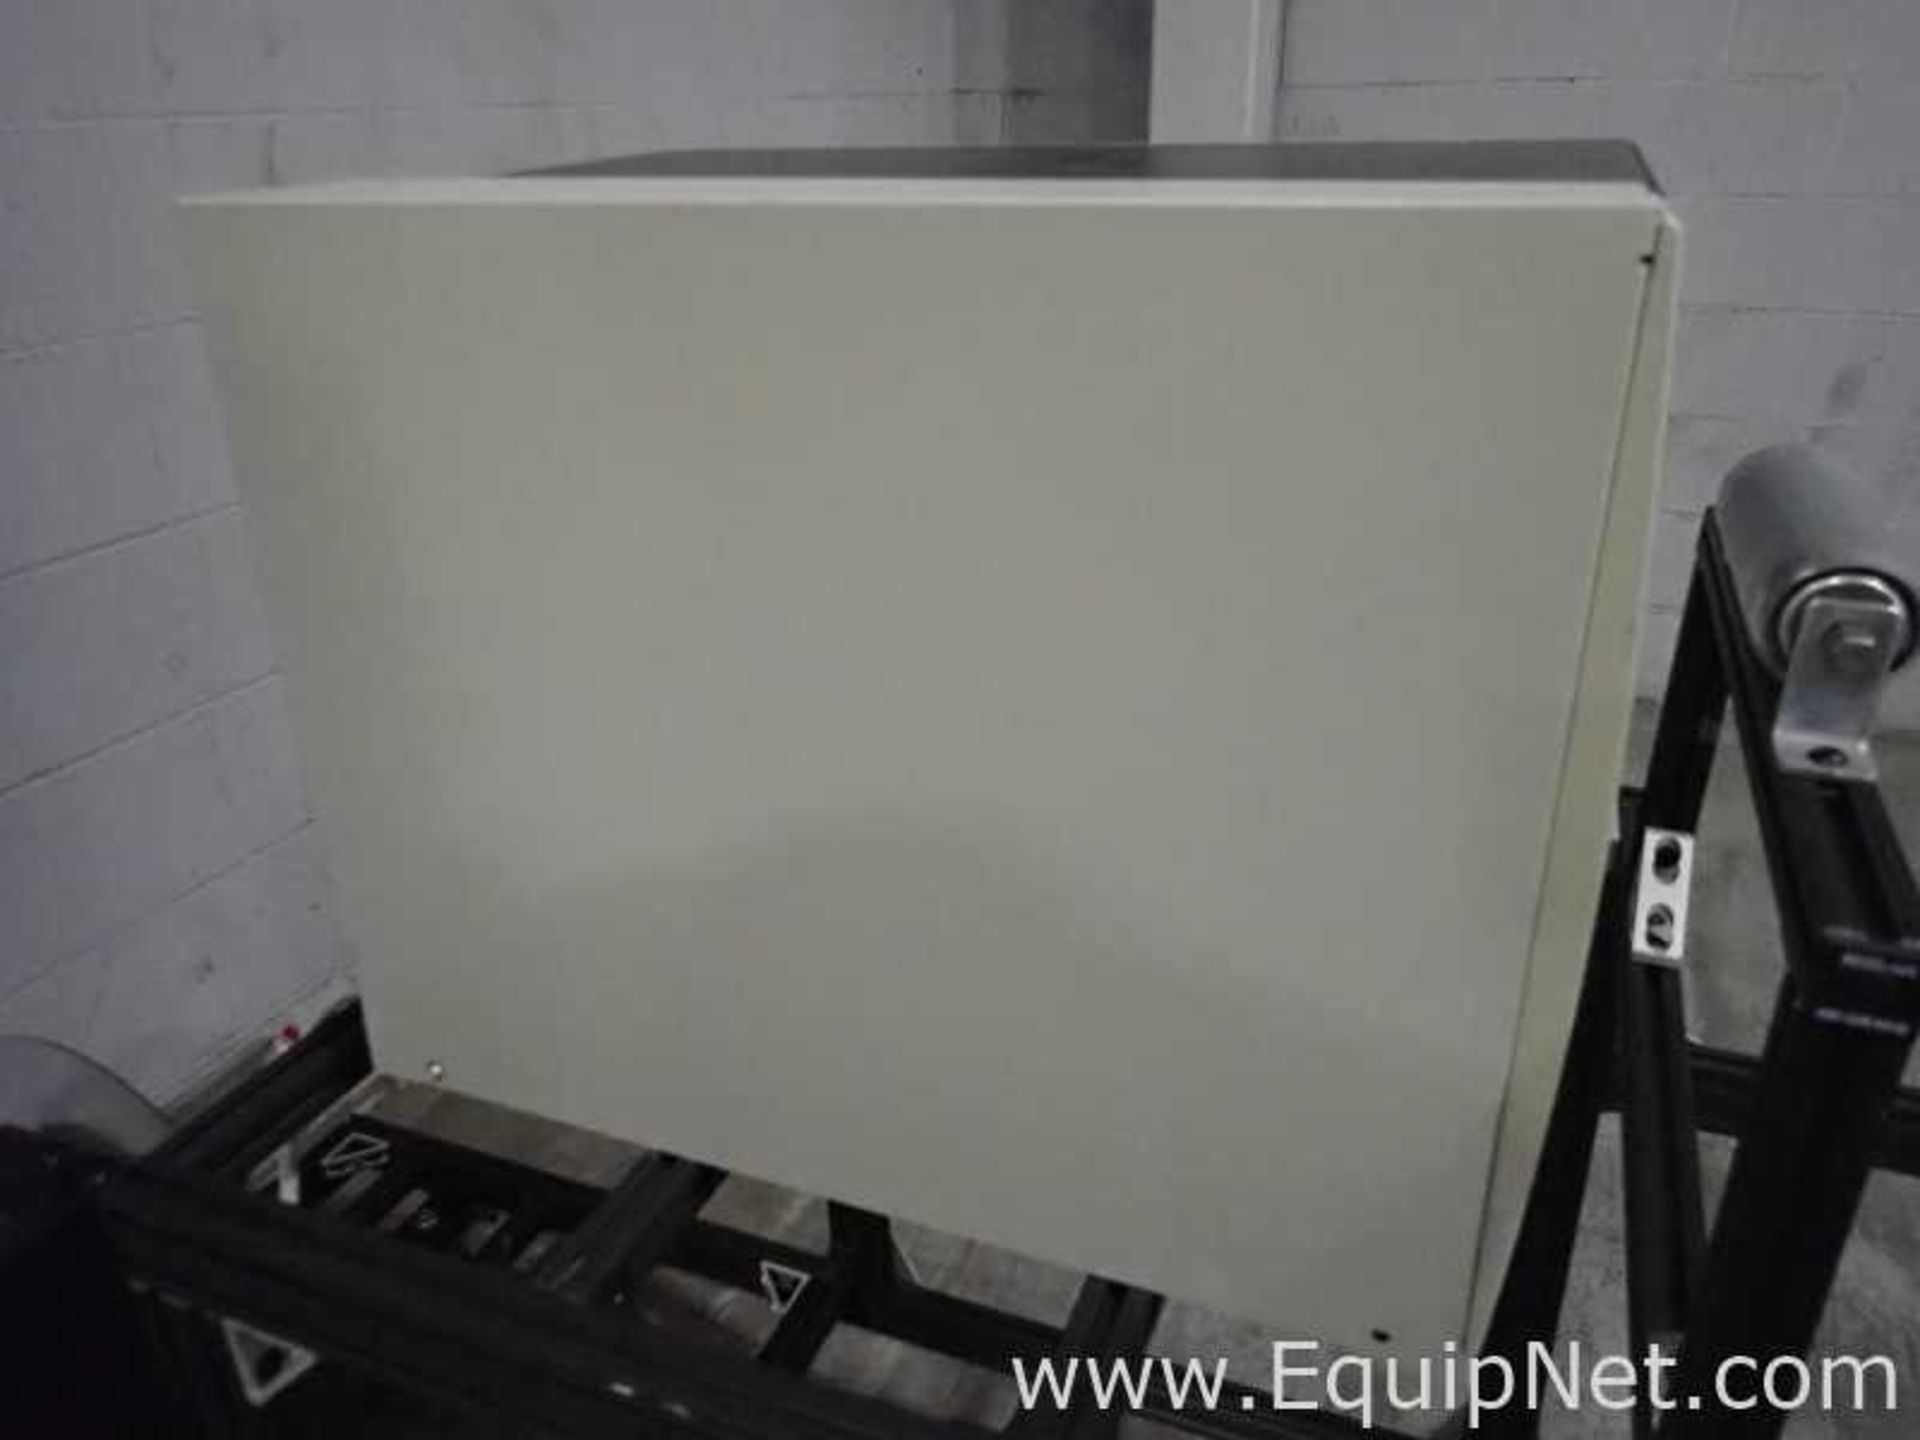 EQUIPNET LISTING #831467; REMOVAL COST: $40; MODEL: 170xiII; DESCRIPTION: Zebra Technologies 170xill - Image 6 of 12